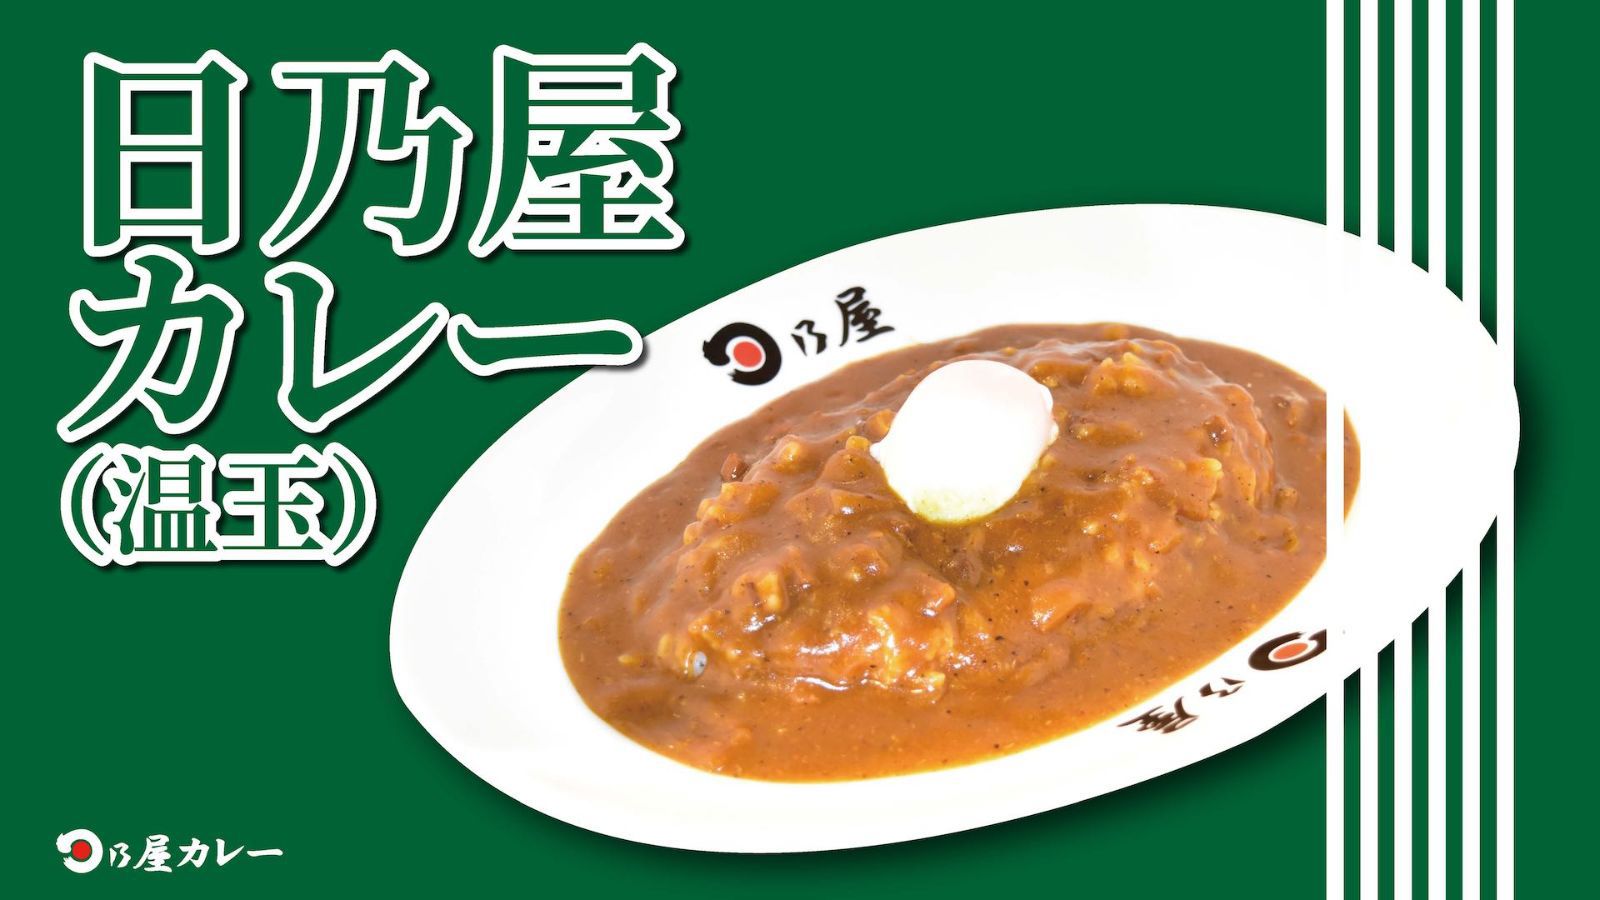 Kanda Curry Grand Prix 2013!! Over 100Branches Fashionable Japanese Curry Brand.